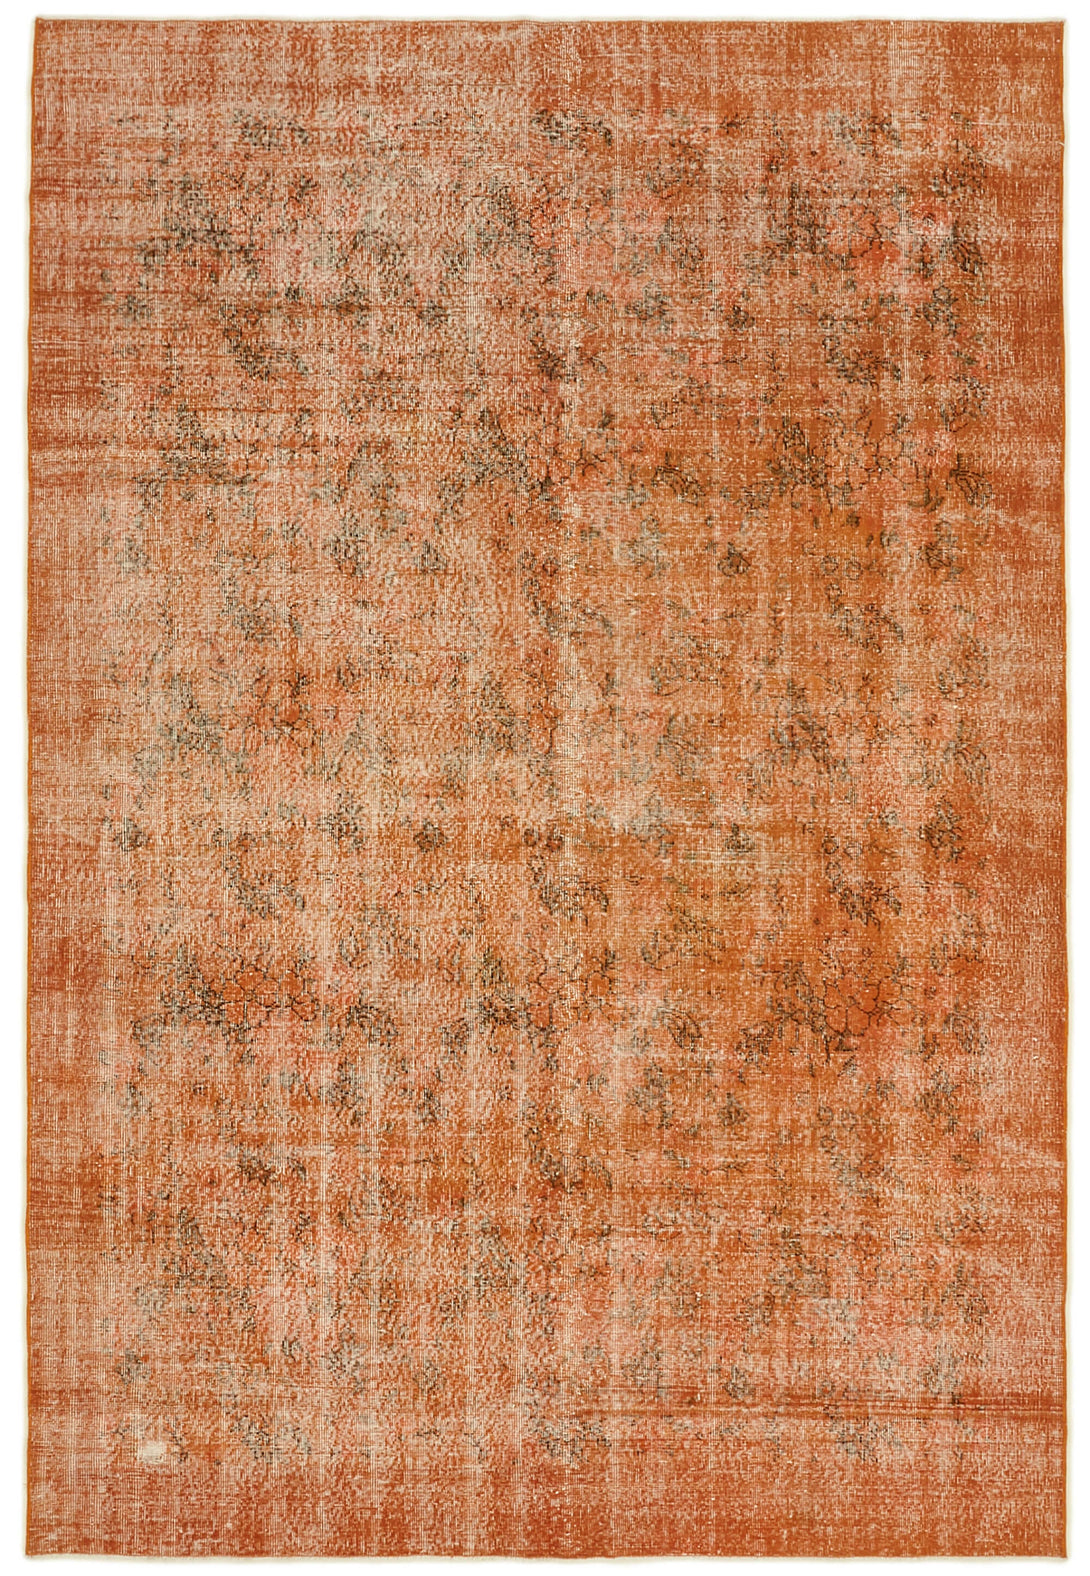 Handmade Overdyed Area Rug > Design# OL-AC-41207 > Size: 6'-11" x 10'-2", Carpet Culture Rugs, Handmade Rugs, NYC Rugs, New Rugs, Shop Rugs, Rug Store, Outlet Rugs, SoHo Rugs, Rugs in USA